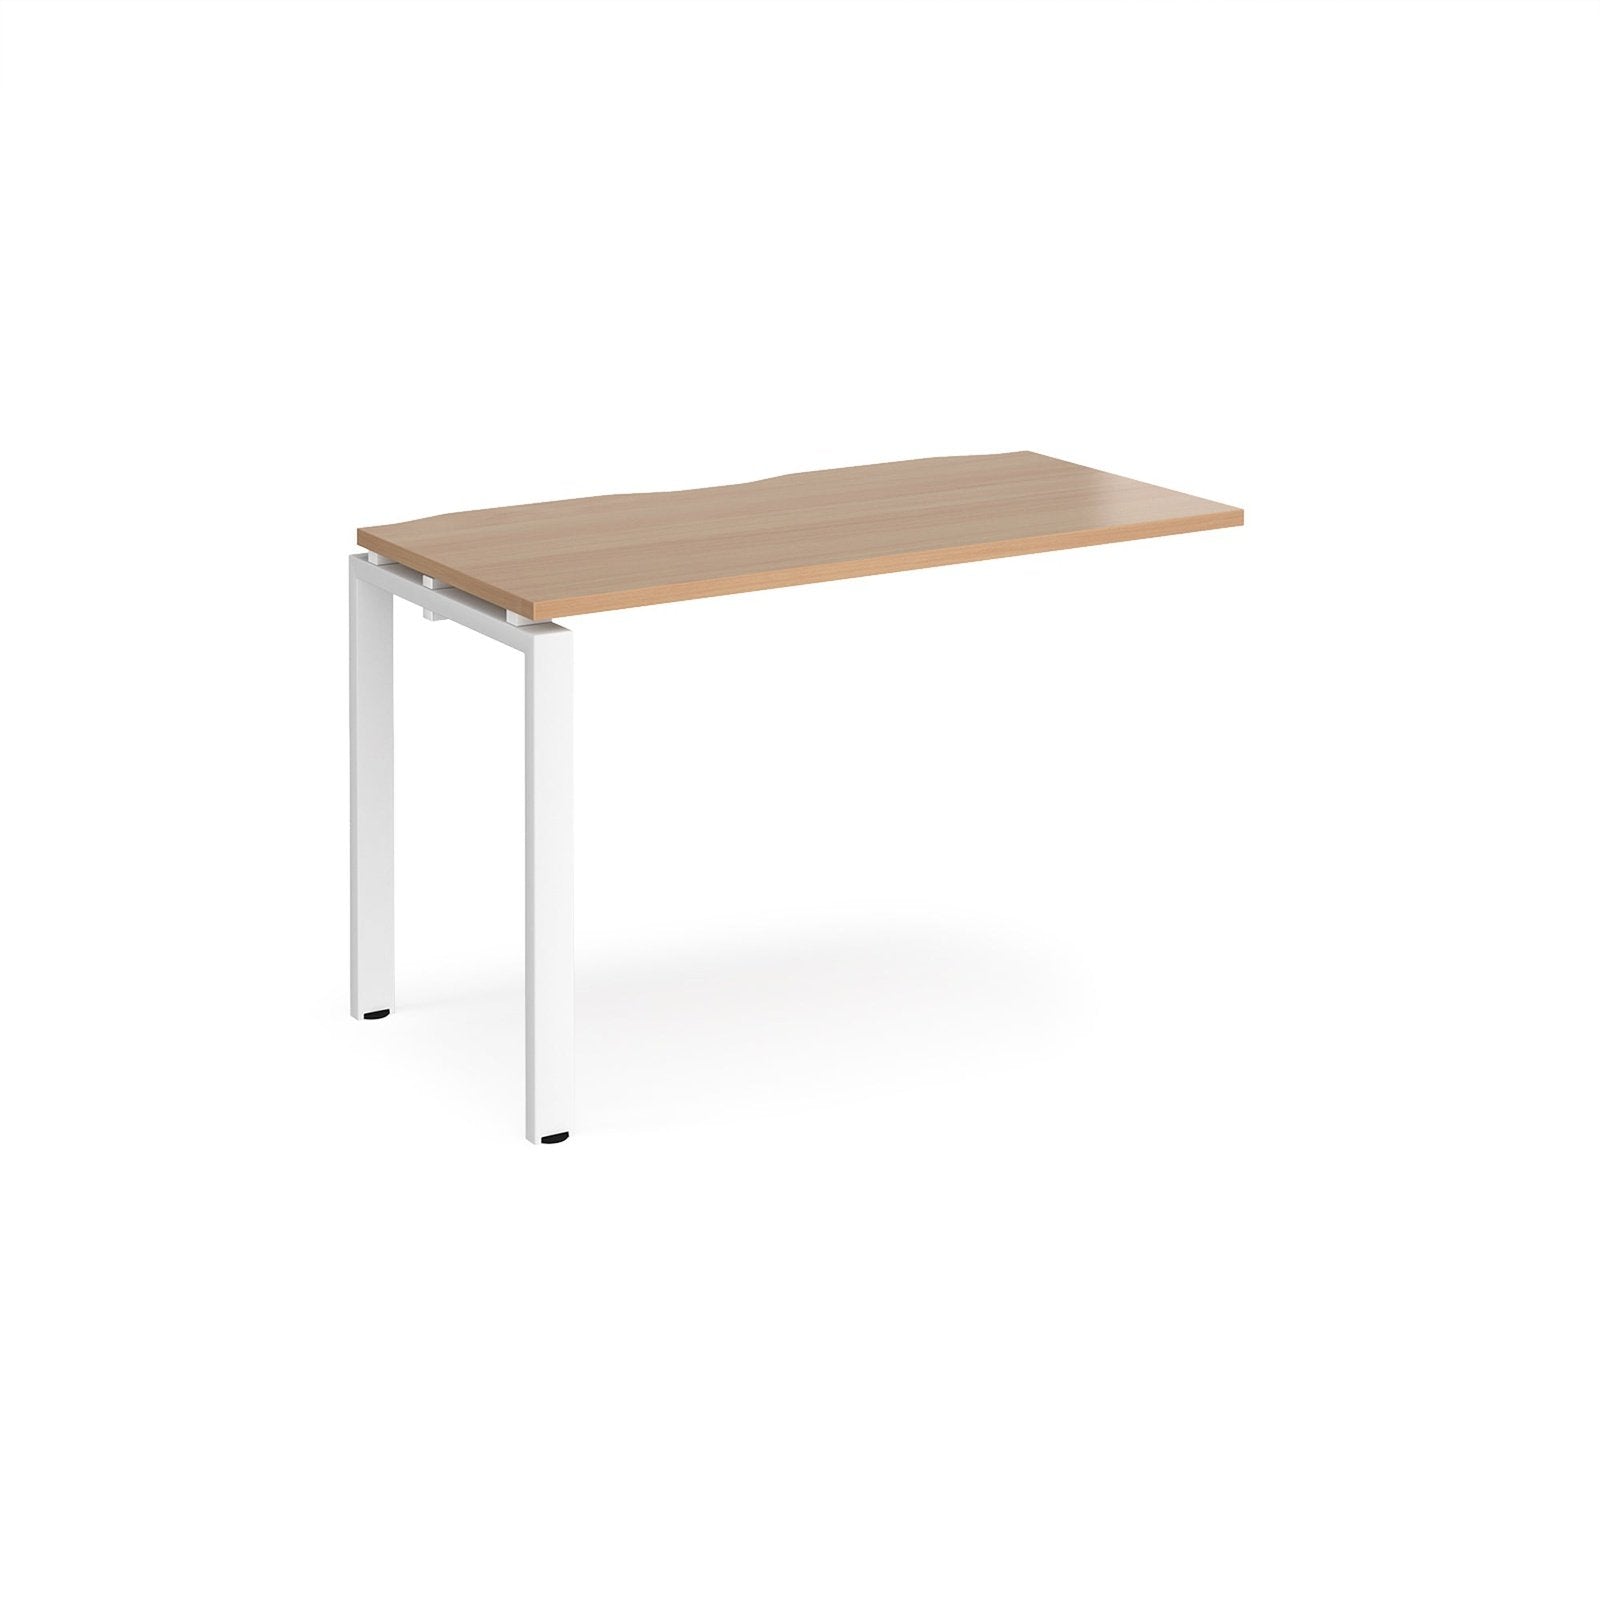 Adapt add on unit single 600 deep - Office Products Online